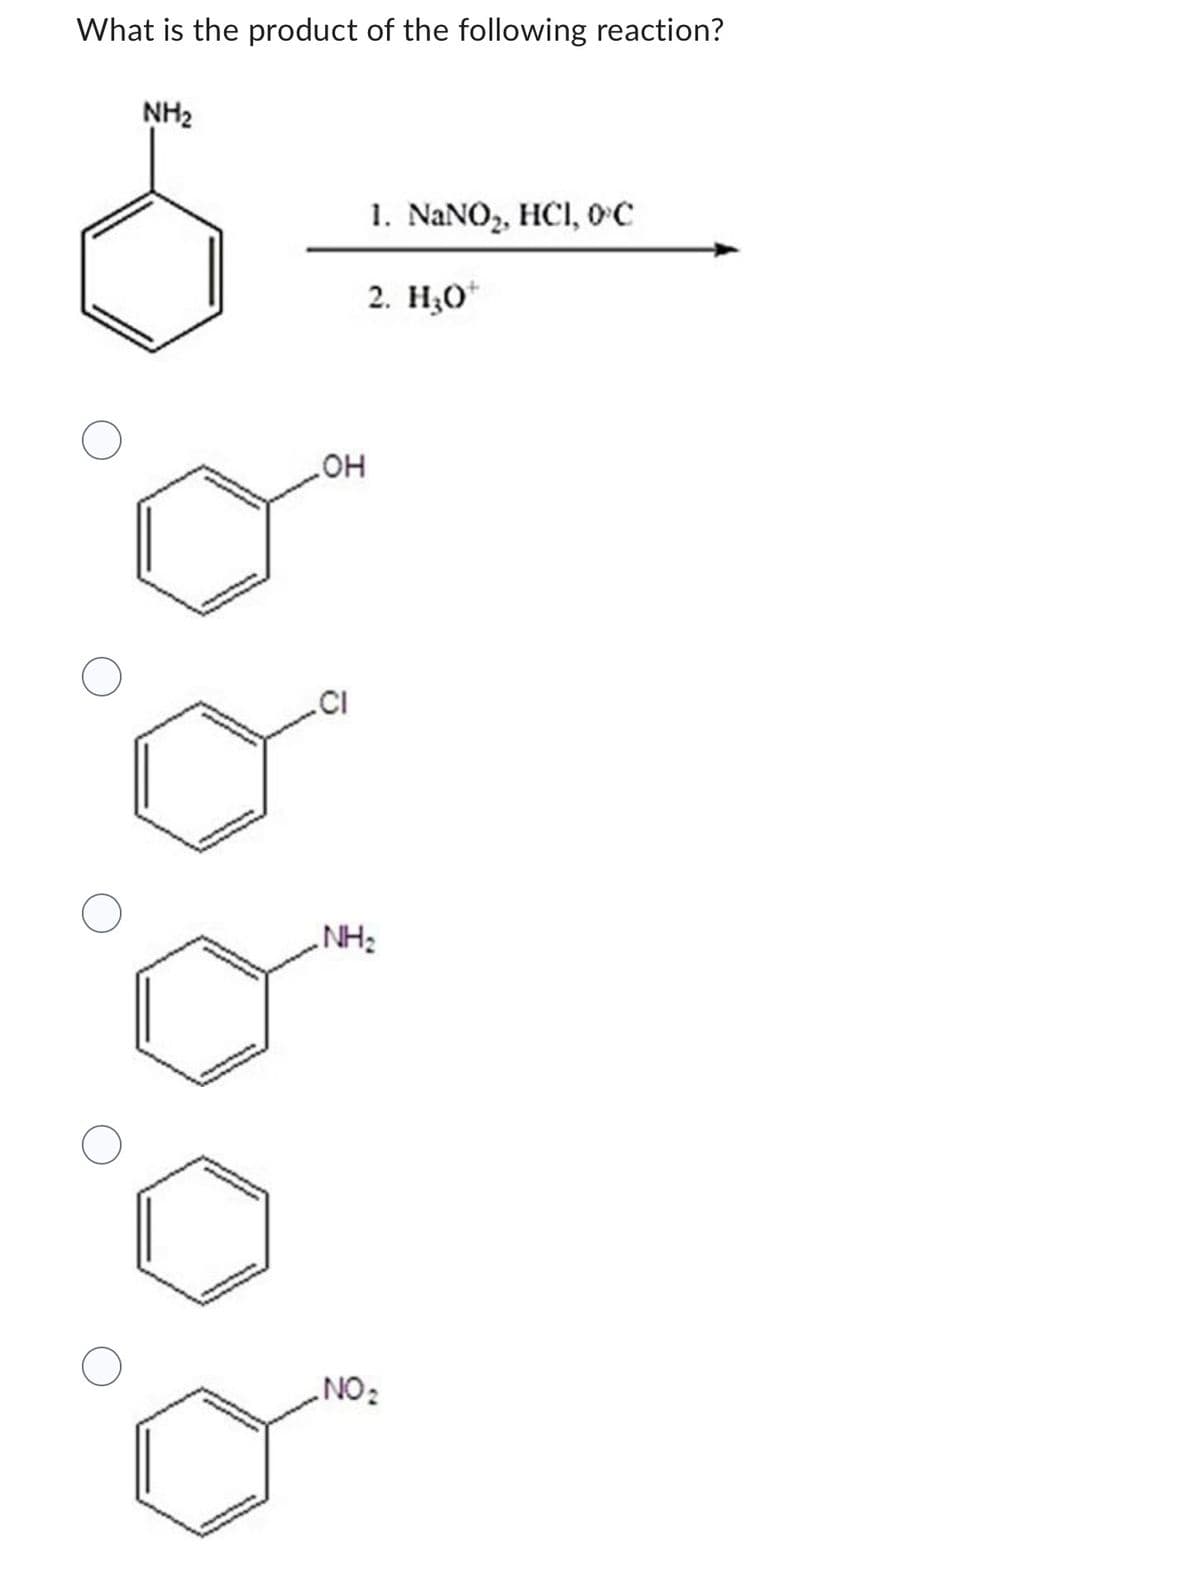 What is the product of the following reaction?
NH₂
.OH
.CI
1. NaNO₂, HC1, 0°C
2. H₂O*
NH₂
.NO ₂